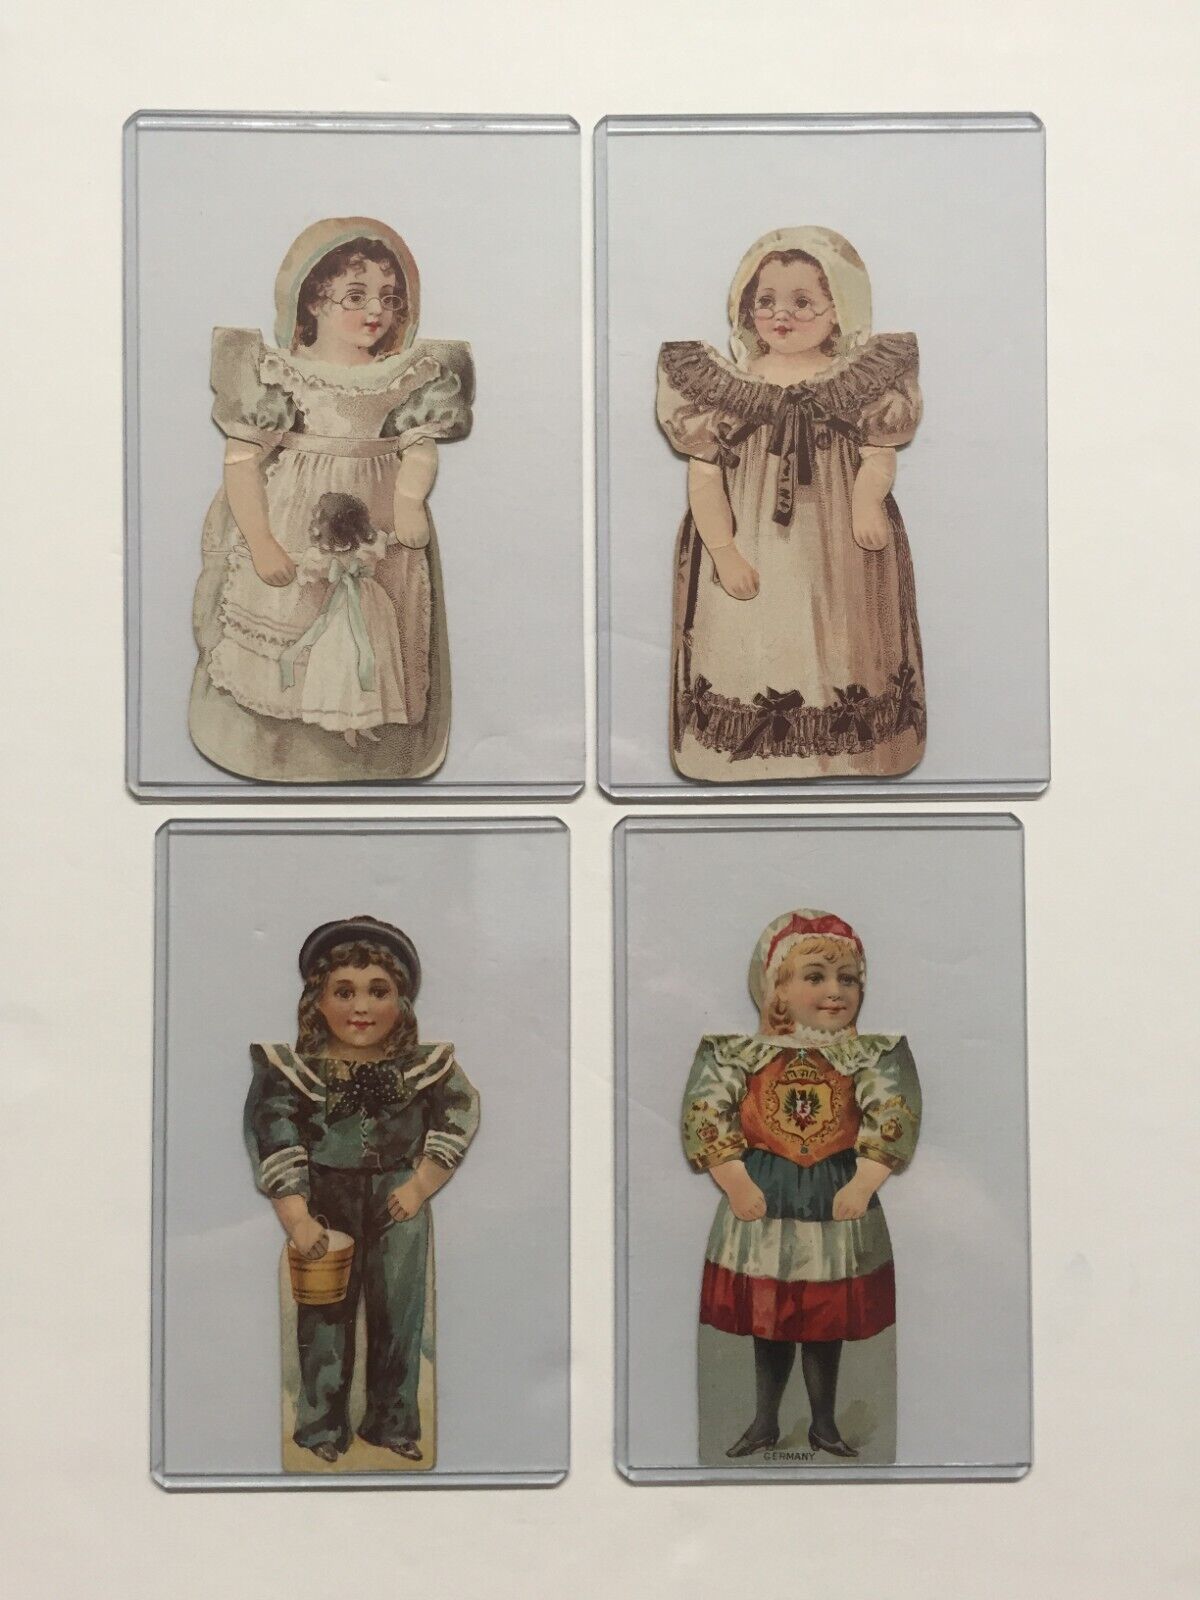 Lot of 4 Victorian Trade Card Stand Up Dolls Clark's ONT Spool Cotton Cordova